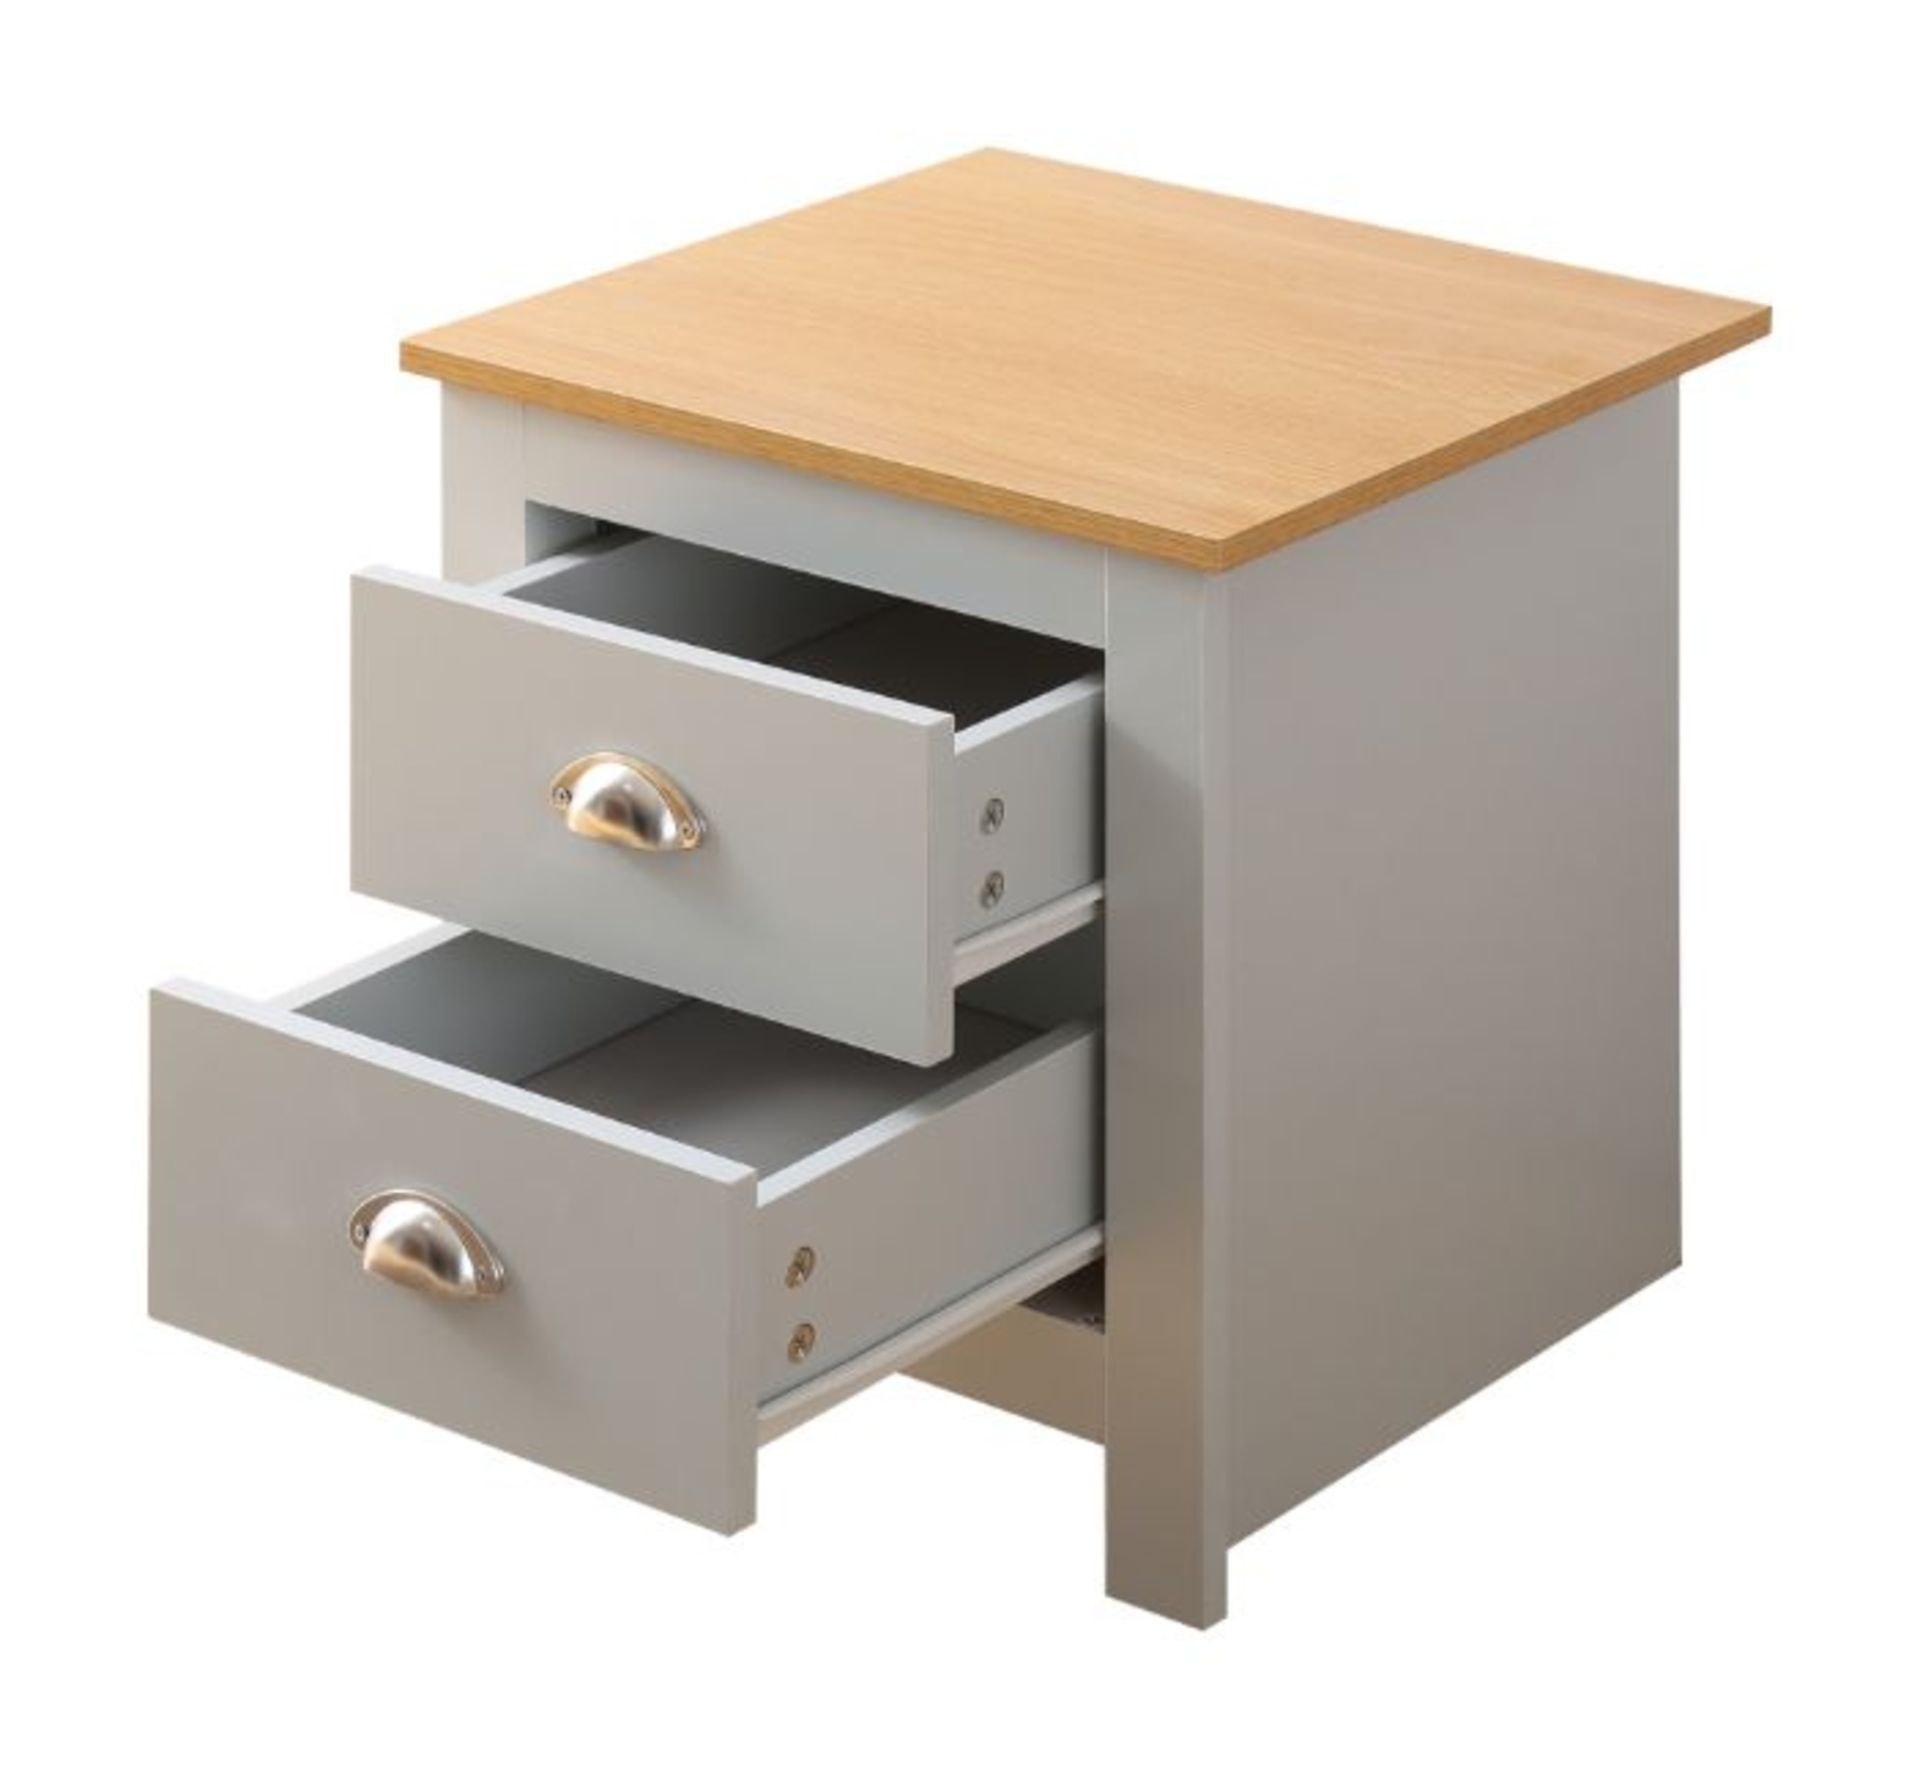 10 X BRAND NEW FLAT PACKED GREY WITH OAK TOP SHAKER-INSPIRED STYLISH DESIGN BEDSIDES - Image 4 of 4